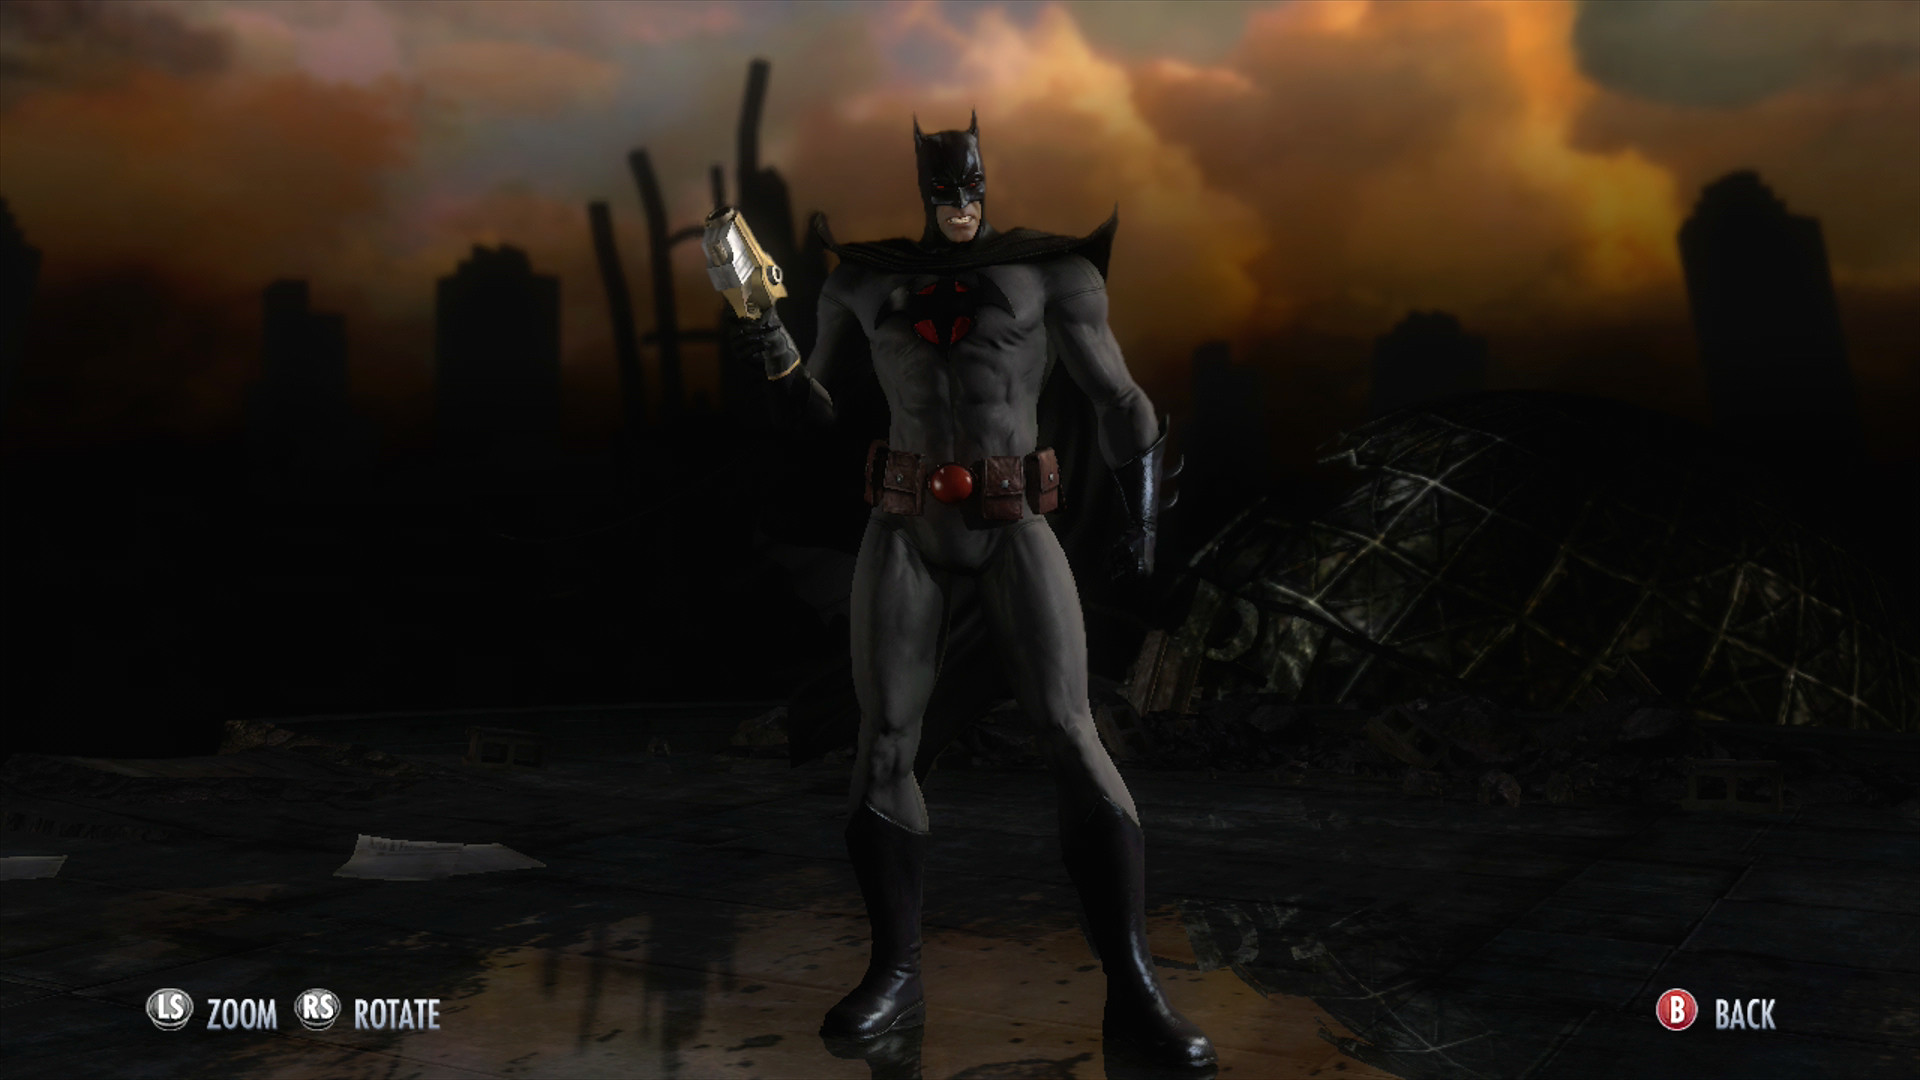 1920x1080 Video Game - Injustice: Gods Among Us Wallpaper